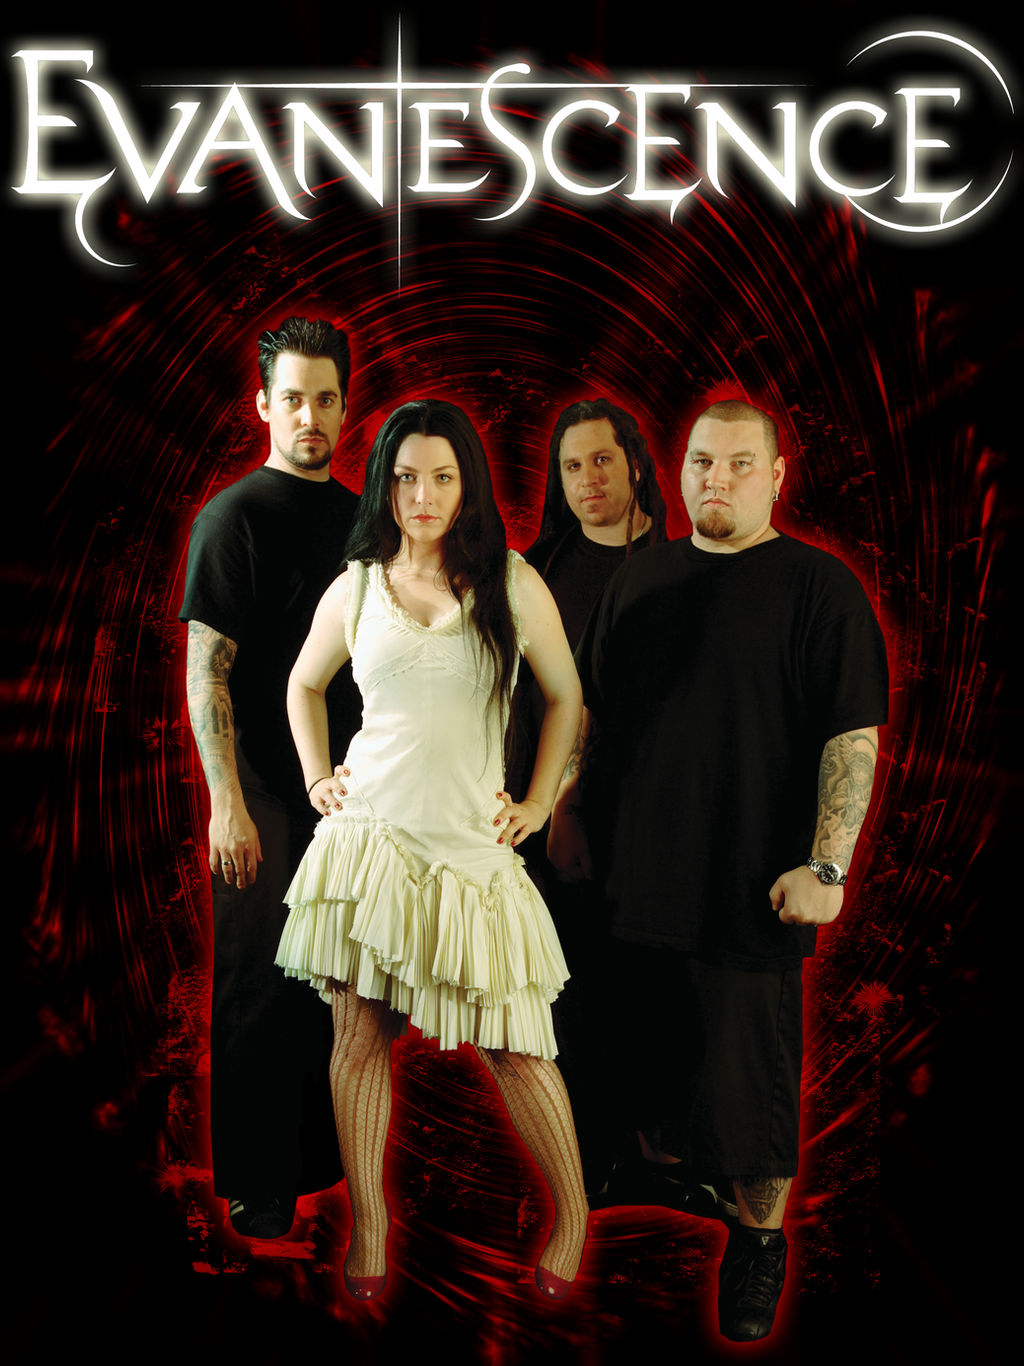 Evanescence Band  Poster  by pyraLyte on DeviantArt